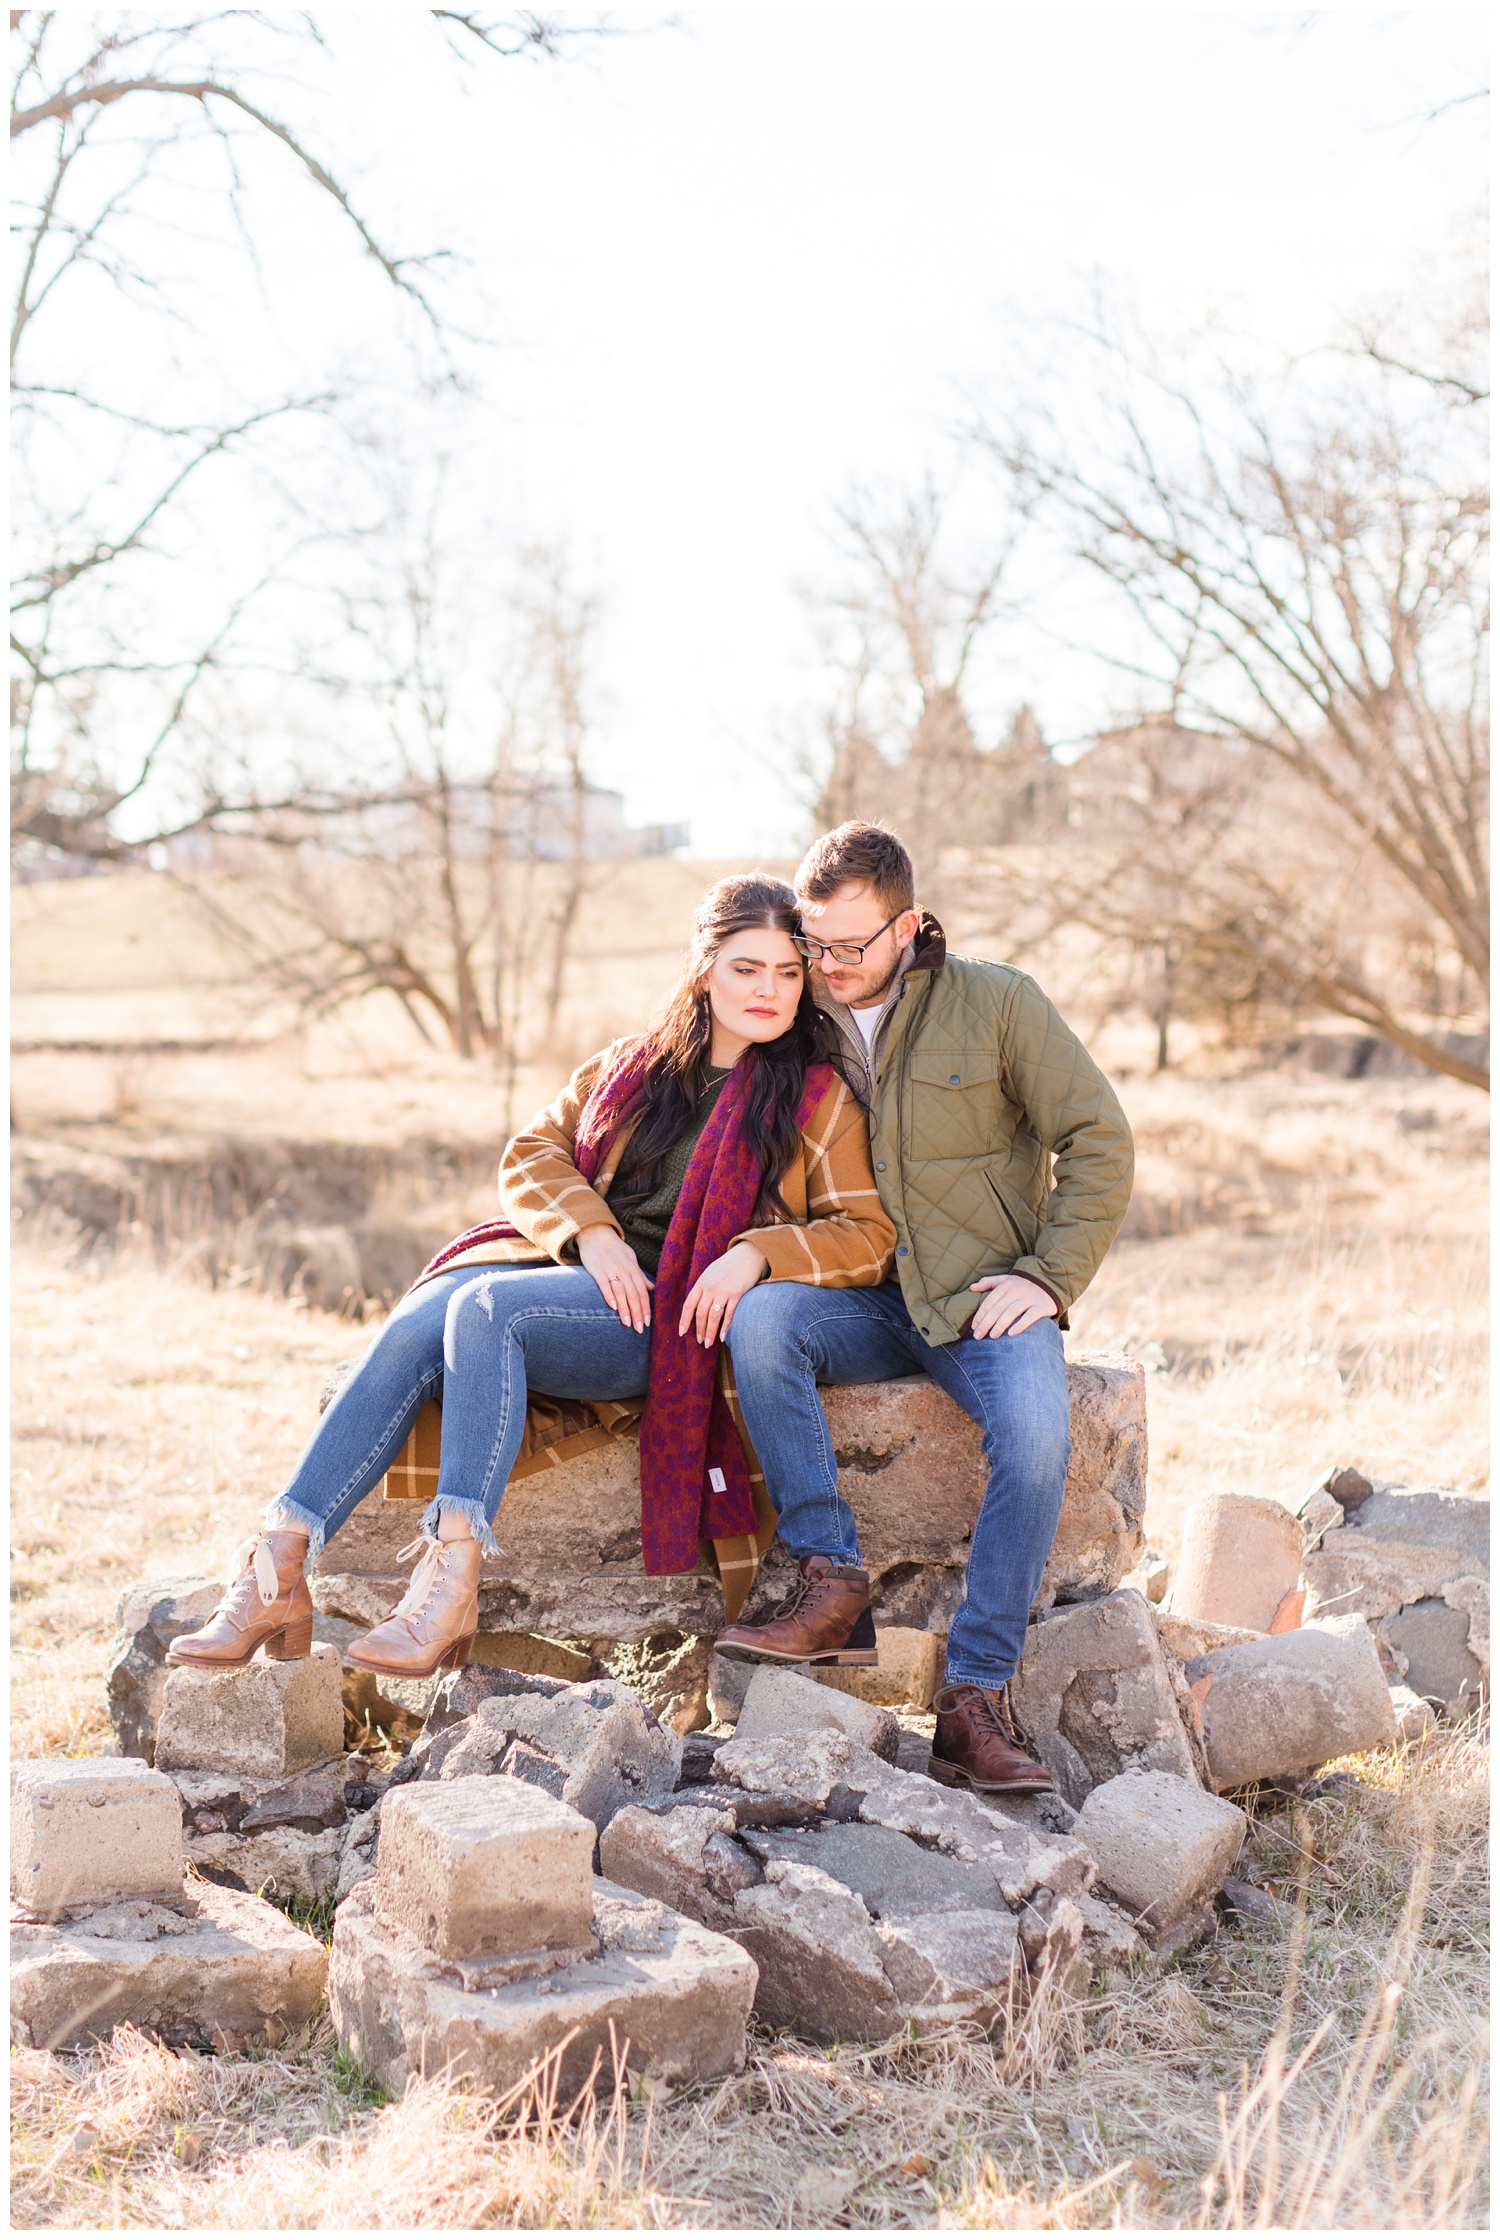 Rachel and Mitch snuggle together on a pile of stones during their engagement session | CB Studio